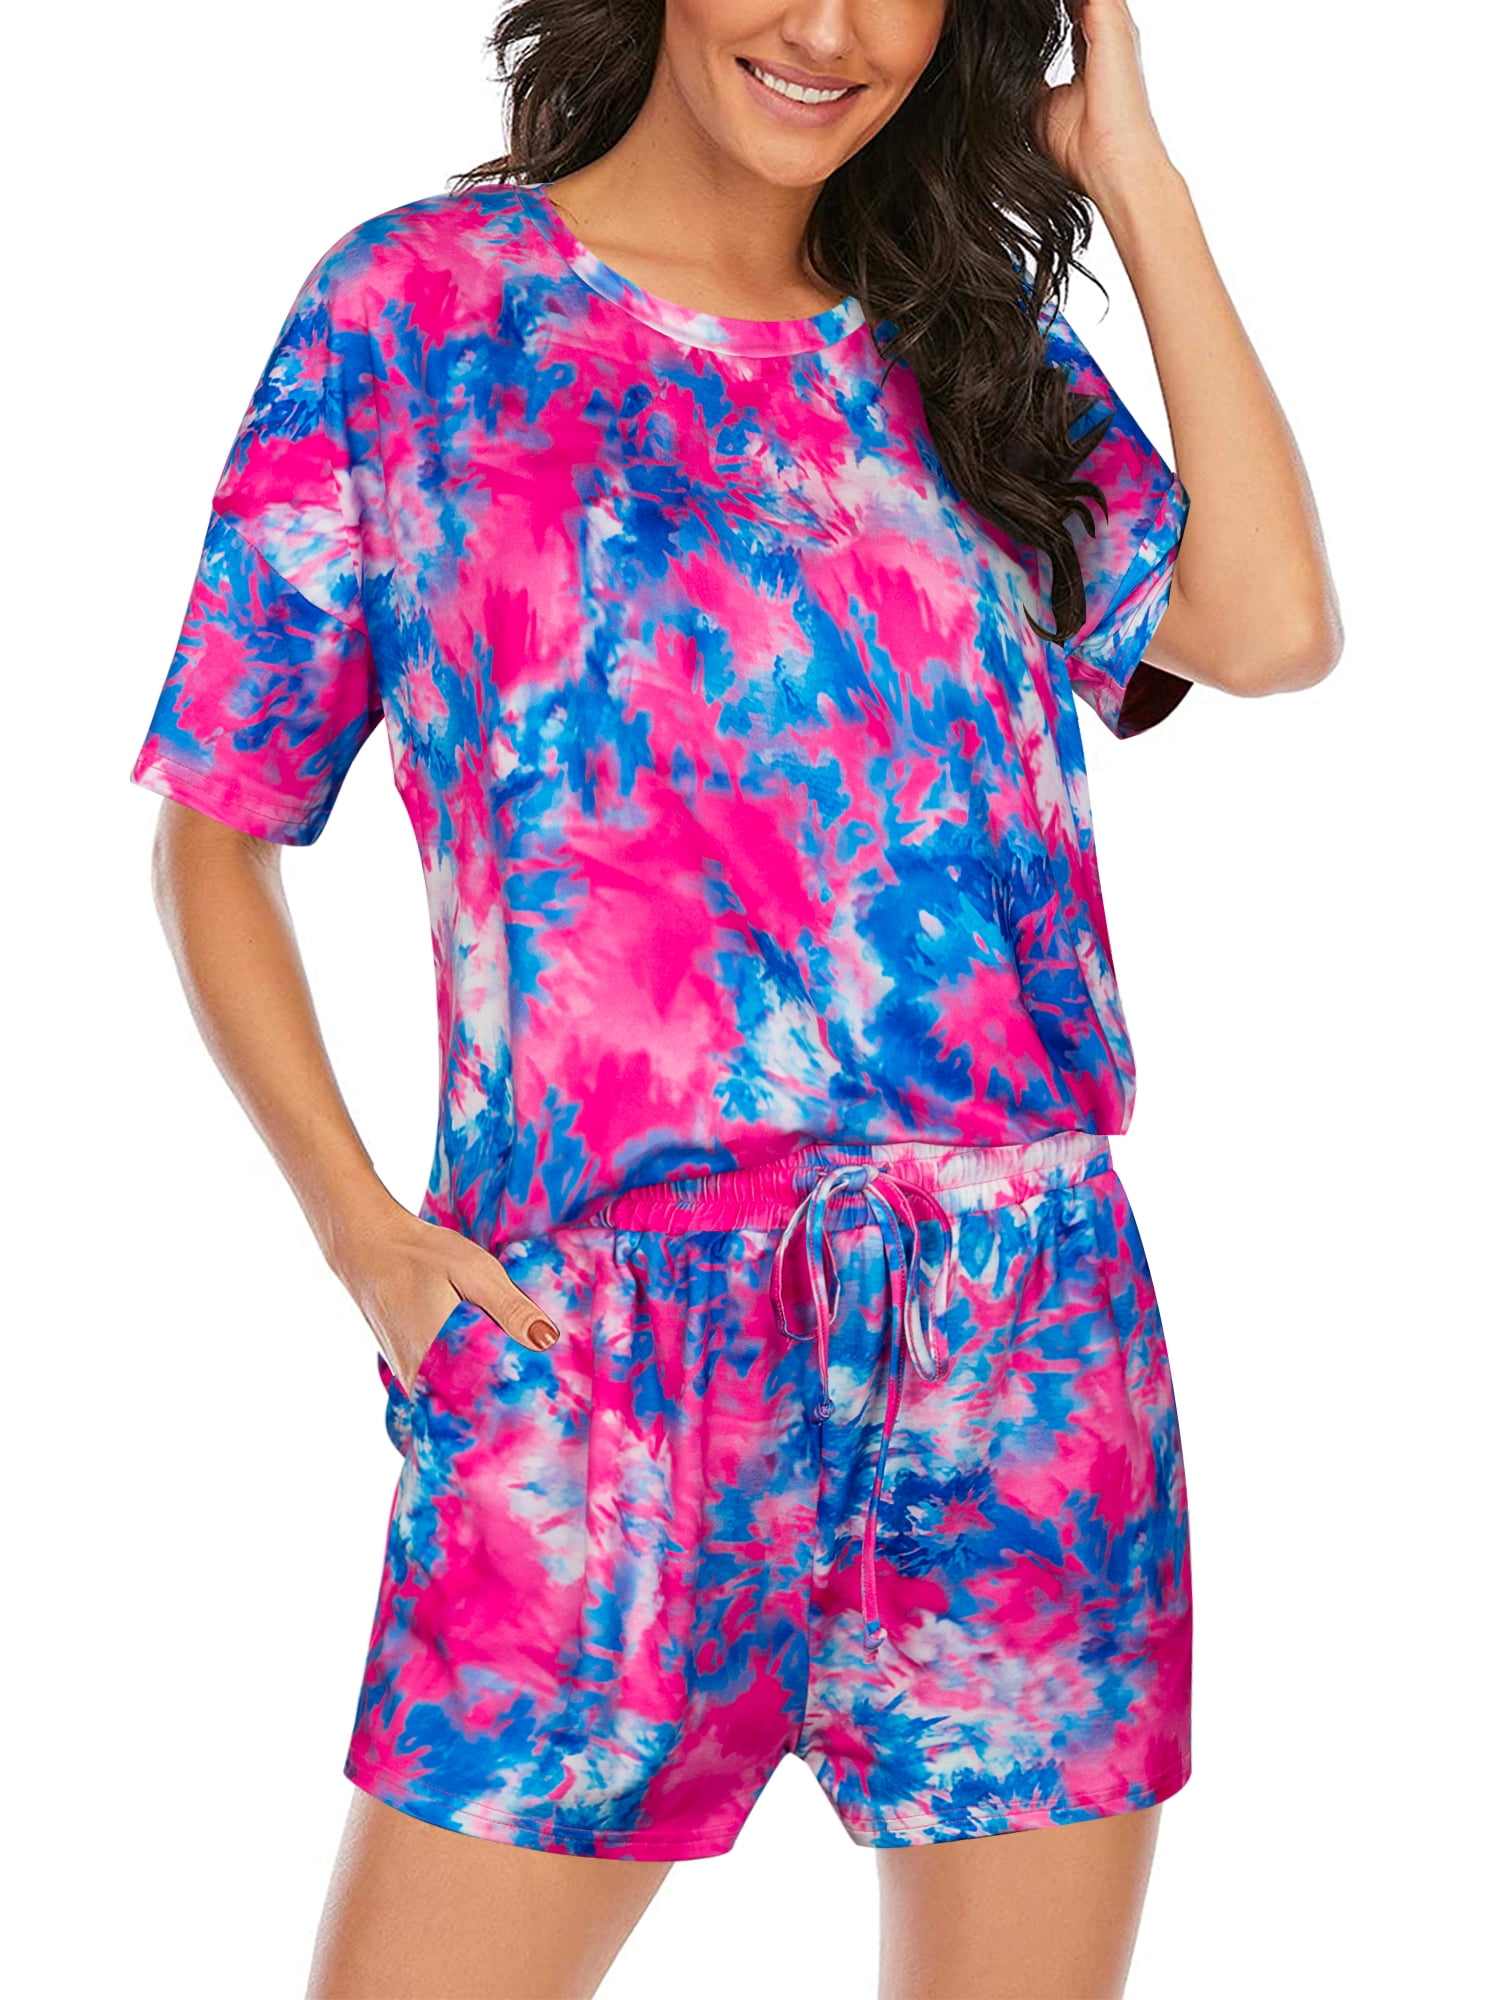 Women Plus Size Tie Dye Printed Pajama Sets Short Sleeve Tops and ...